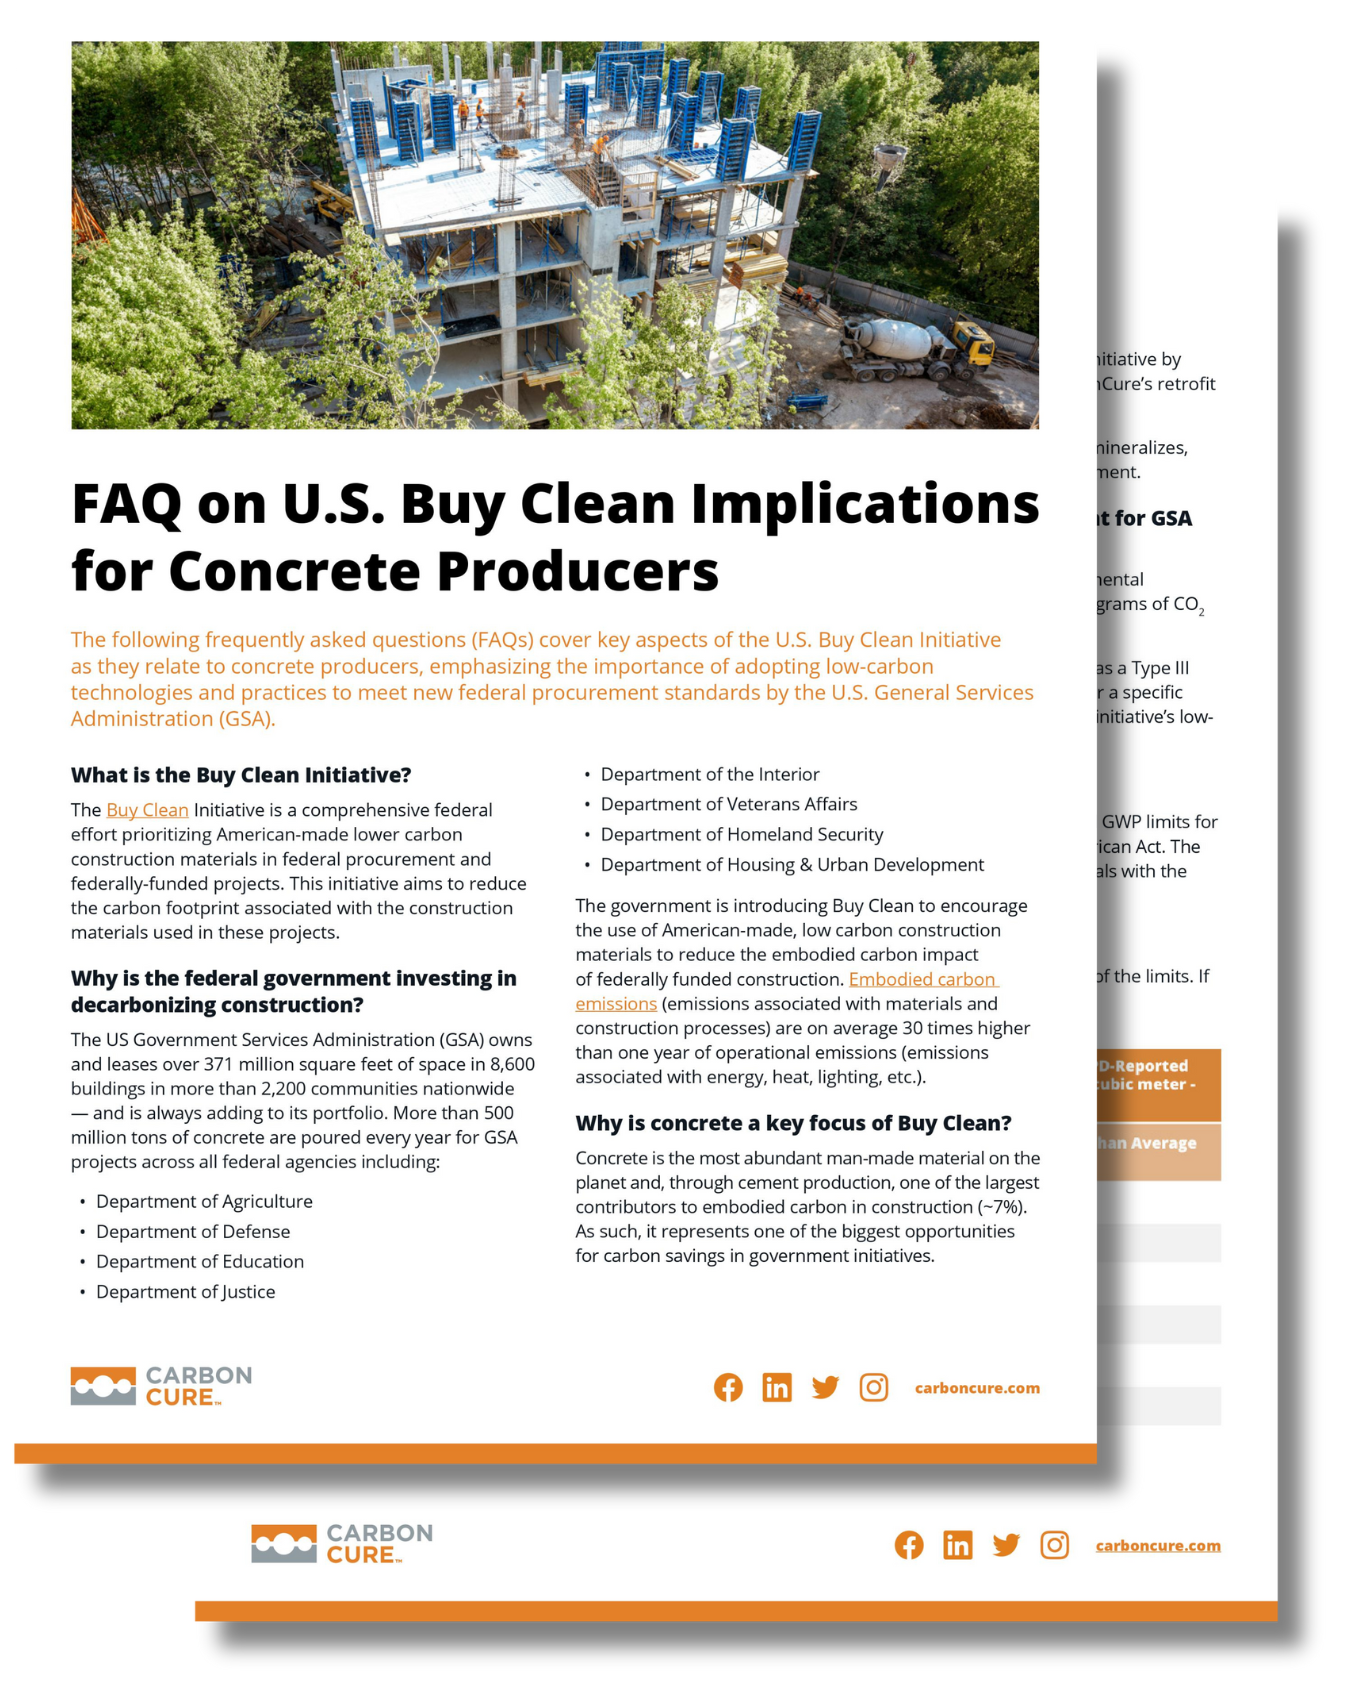 FAQ U.S. Buy Clean Implications for Concrete Producers